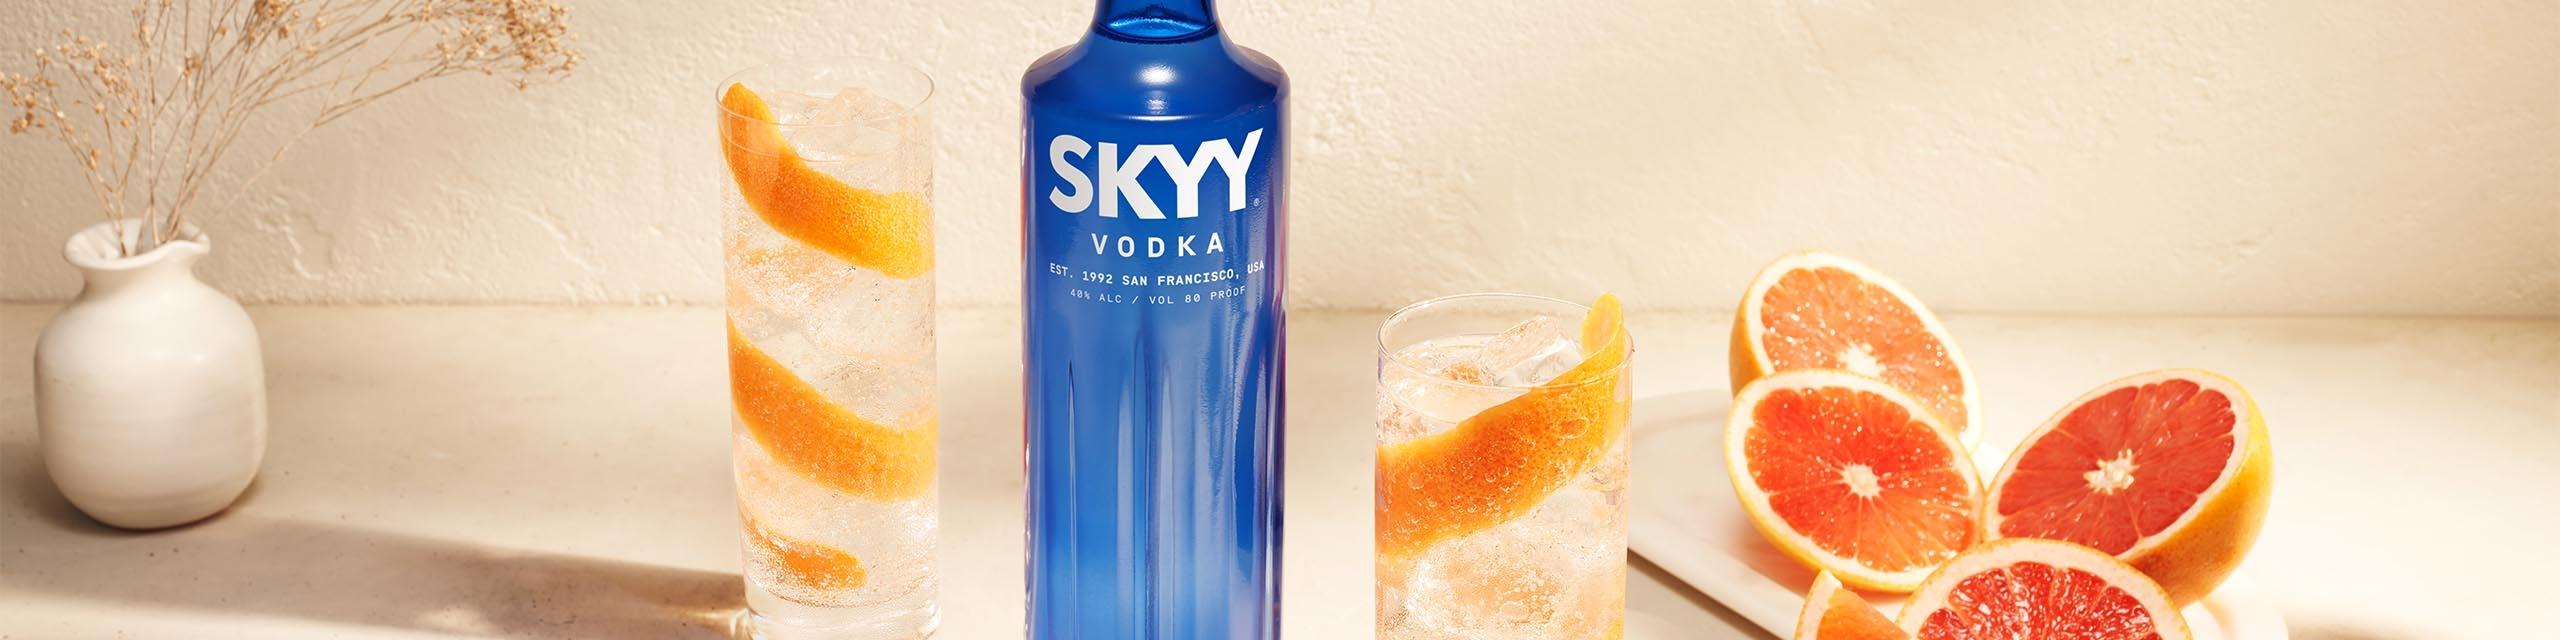 SKYY® Vodka celebrates San Francisco by joining its namesake with the Pacific Ocean. SKYY® is now made with water enriched by Pacific minerals from the San Francisco Bay Area, which add subtle salinity and minerality. They may also reduce bitterness, and enhance the inherent sweetness and/or flavor of some cocktail ingredients, such as grapefruit, elevating your Vodka & Soda.